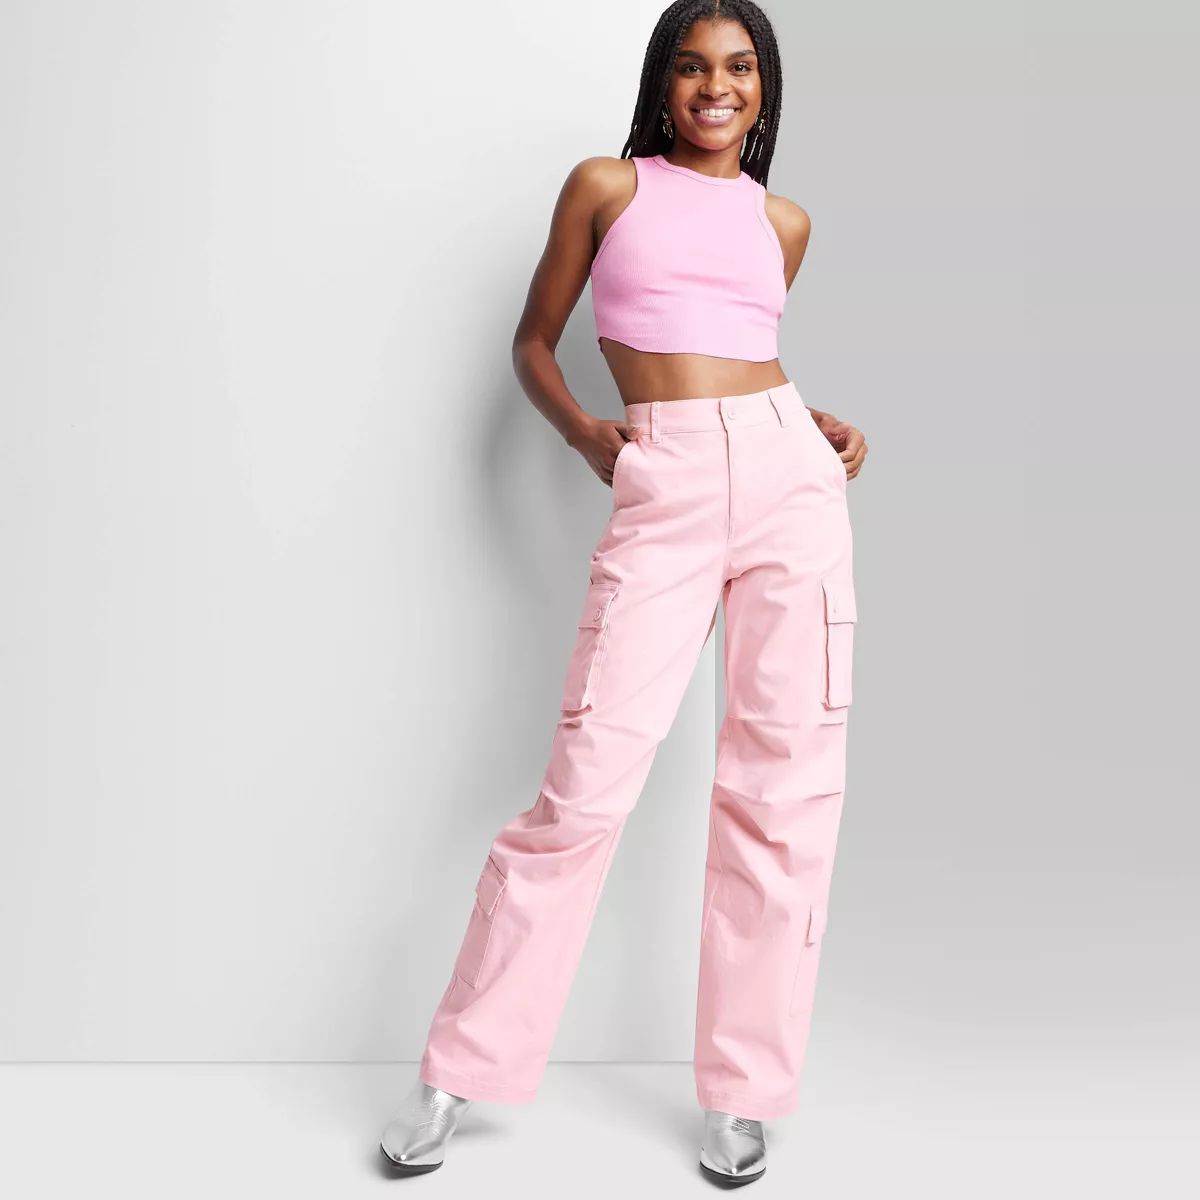 Women's High-Rise Cargo Utility Pants - Wild Fable™ Light Pink S | Target